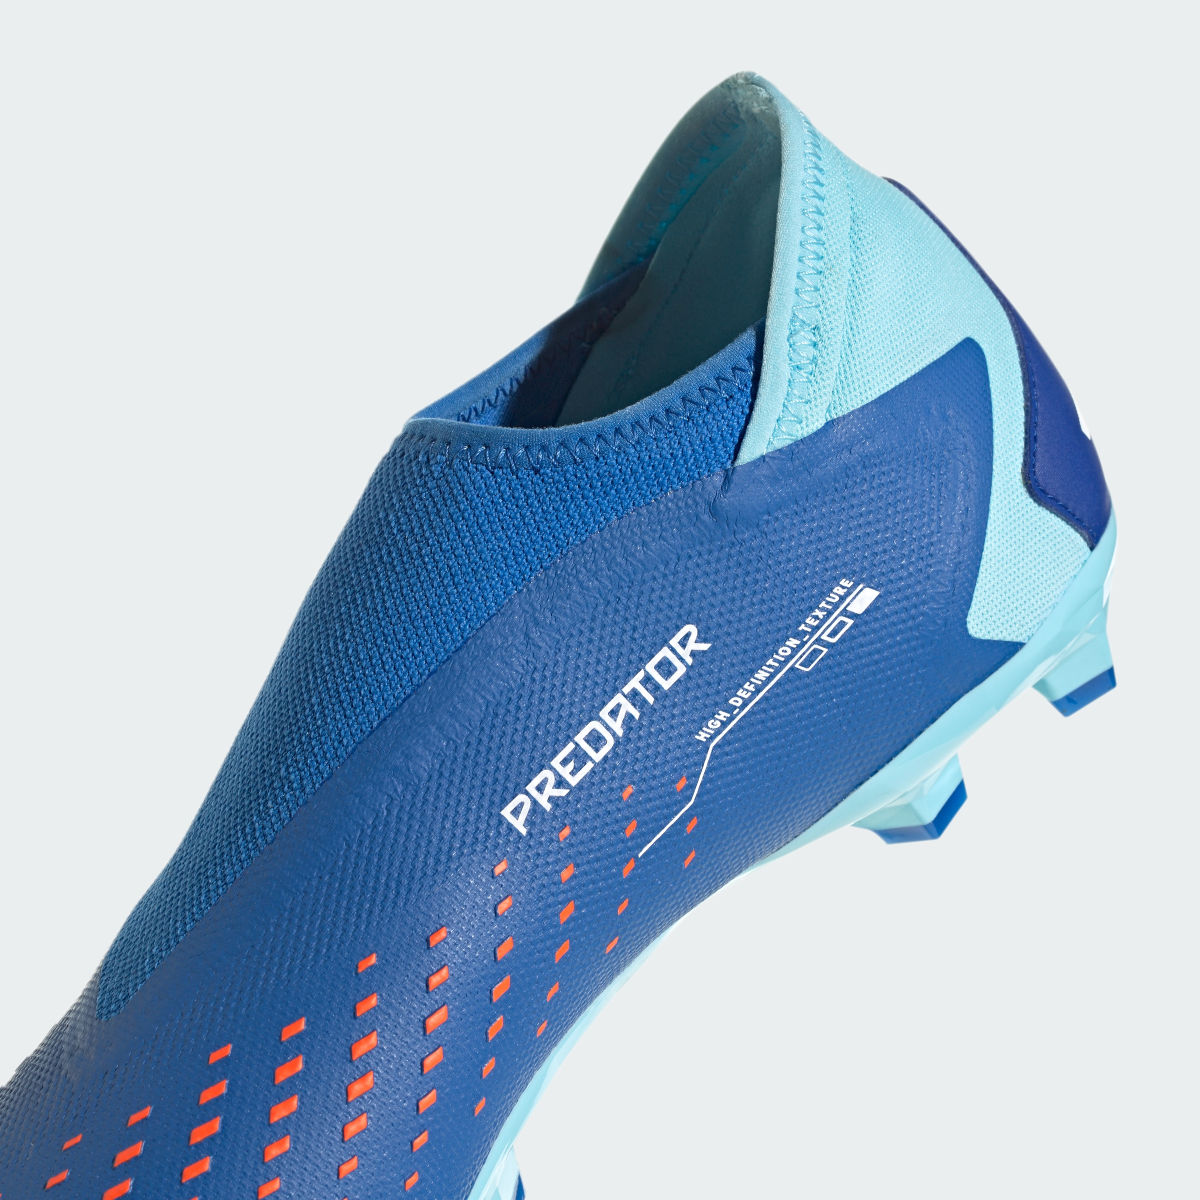 Adidas Predator Accuracy.3 Laceless Firm Ground Cleats. 9